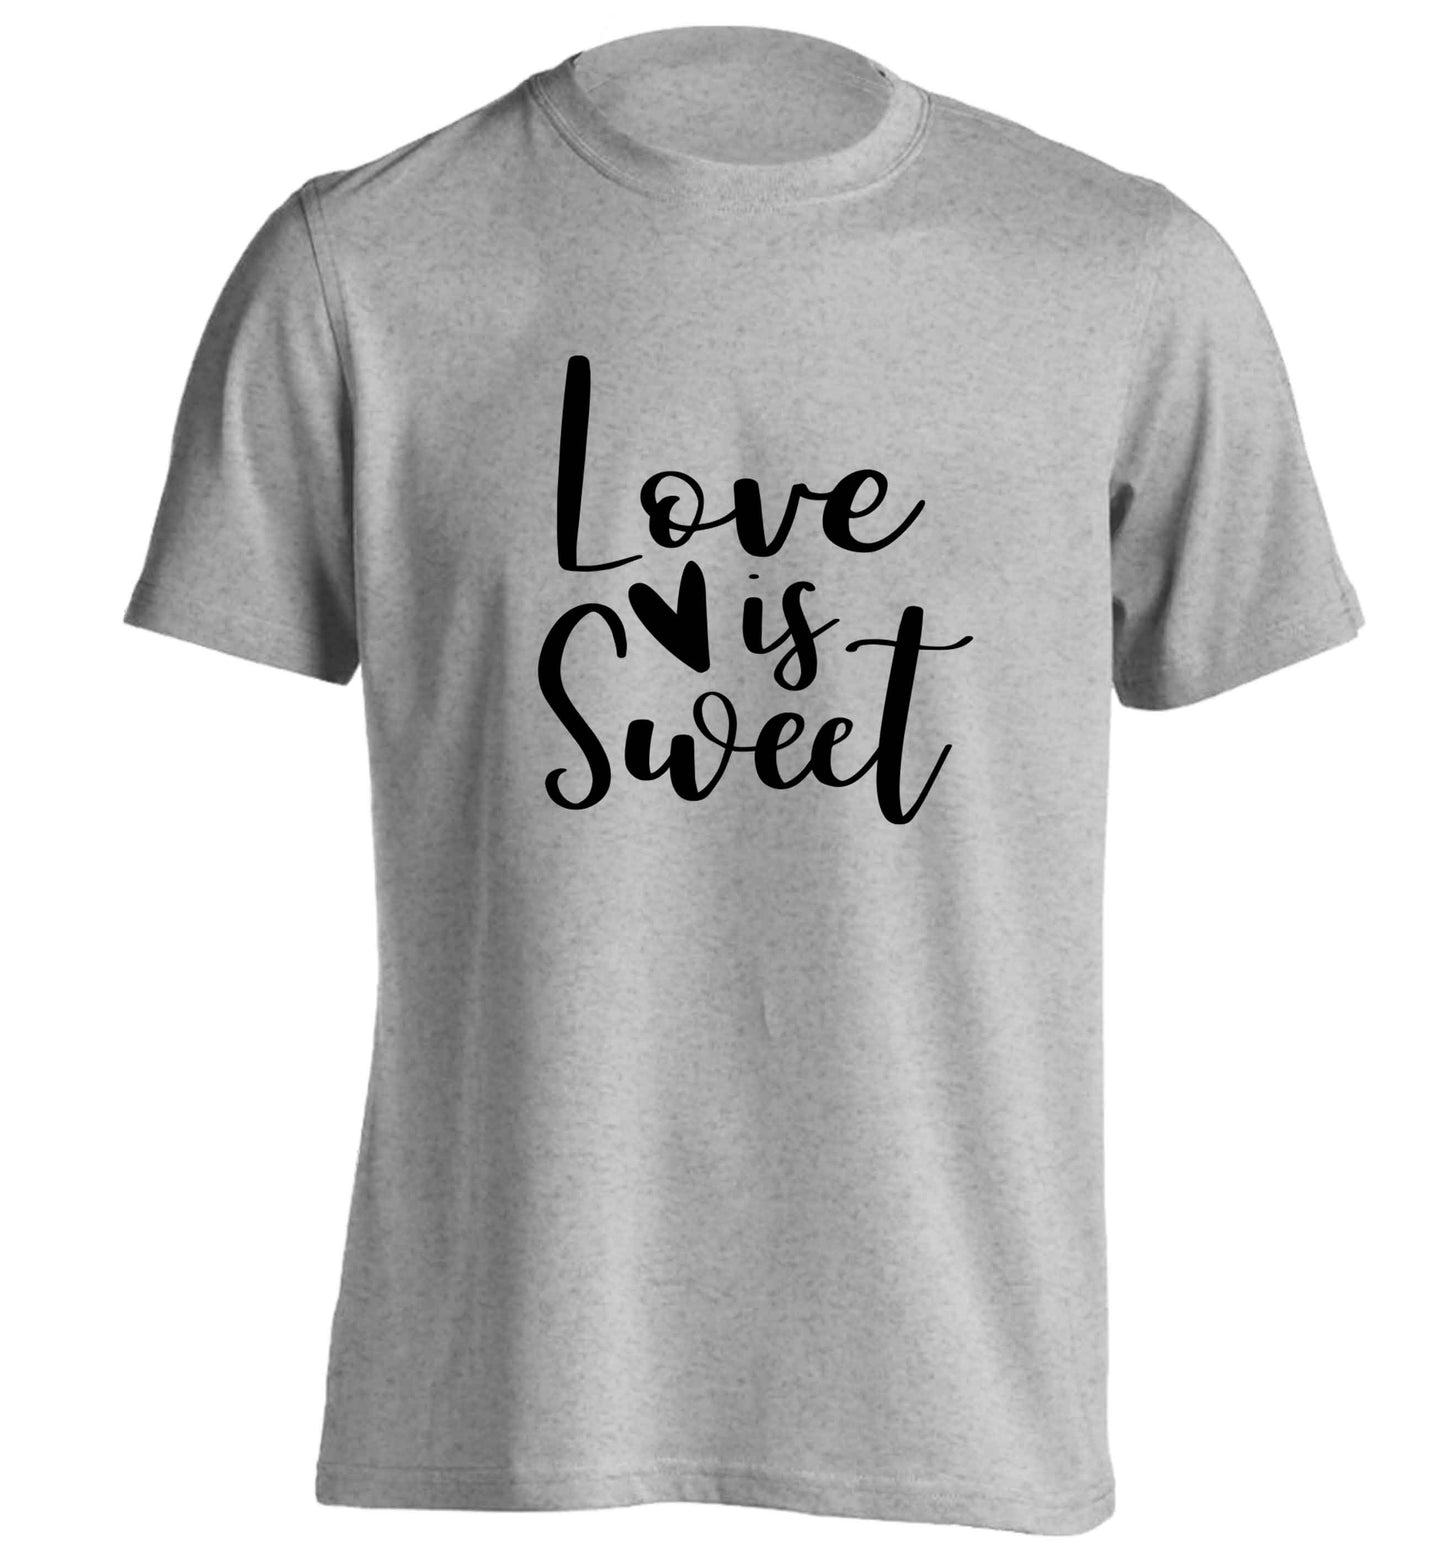 Love really does make the world go round! Ideal for weddings, valentines or just simply to show someone you love them!  adults unisex grey Tshirt 2XL